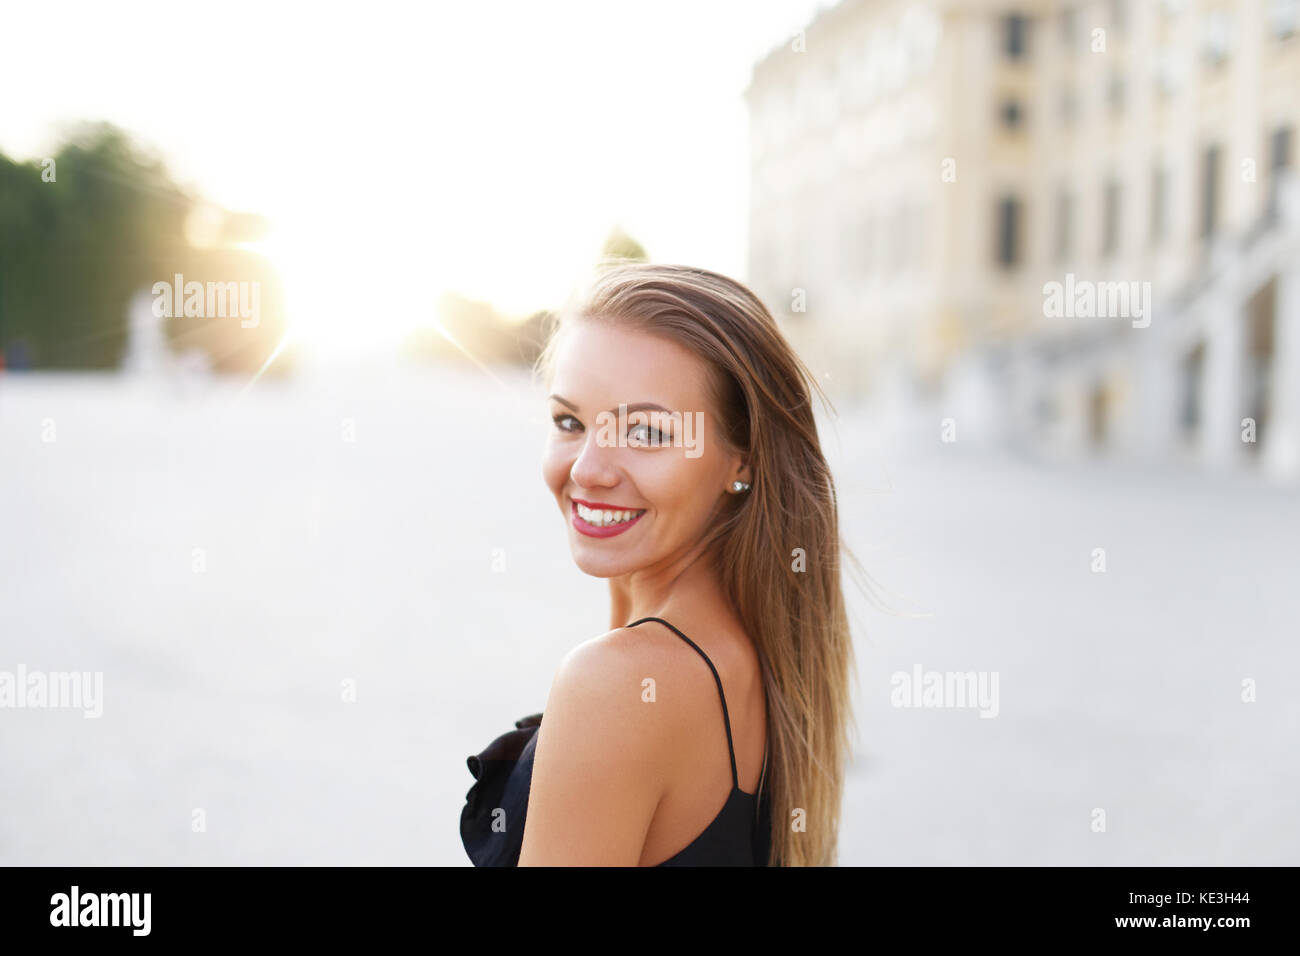 Young brunette woman smiling and looking back at park outdoor Stock Photo